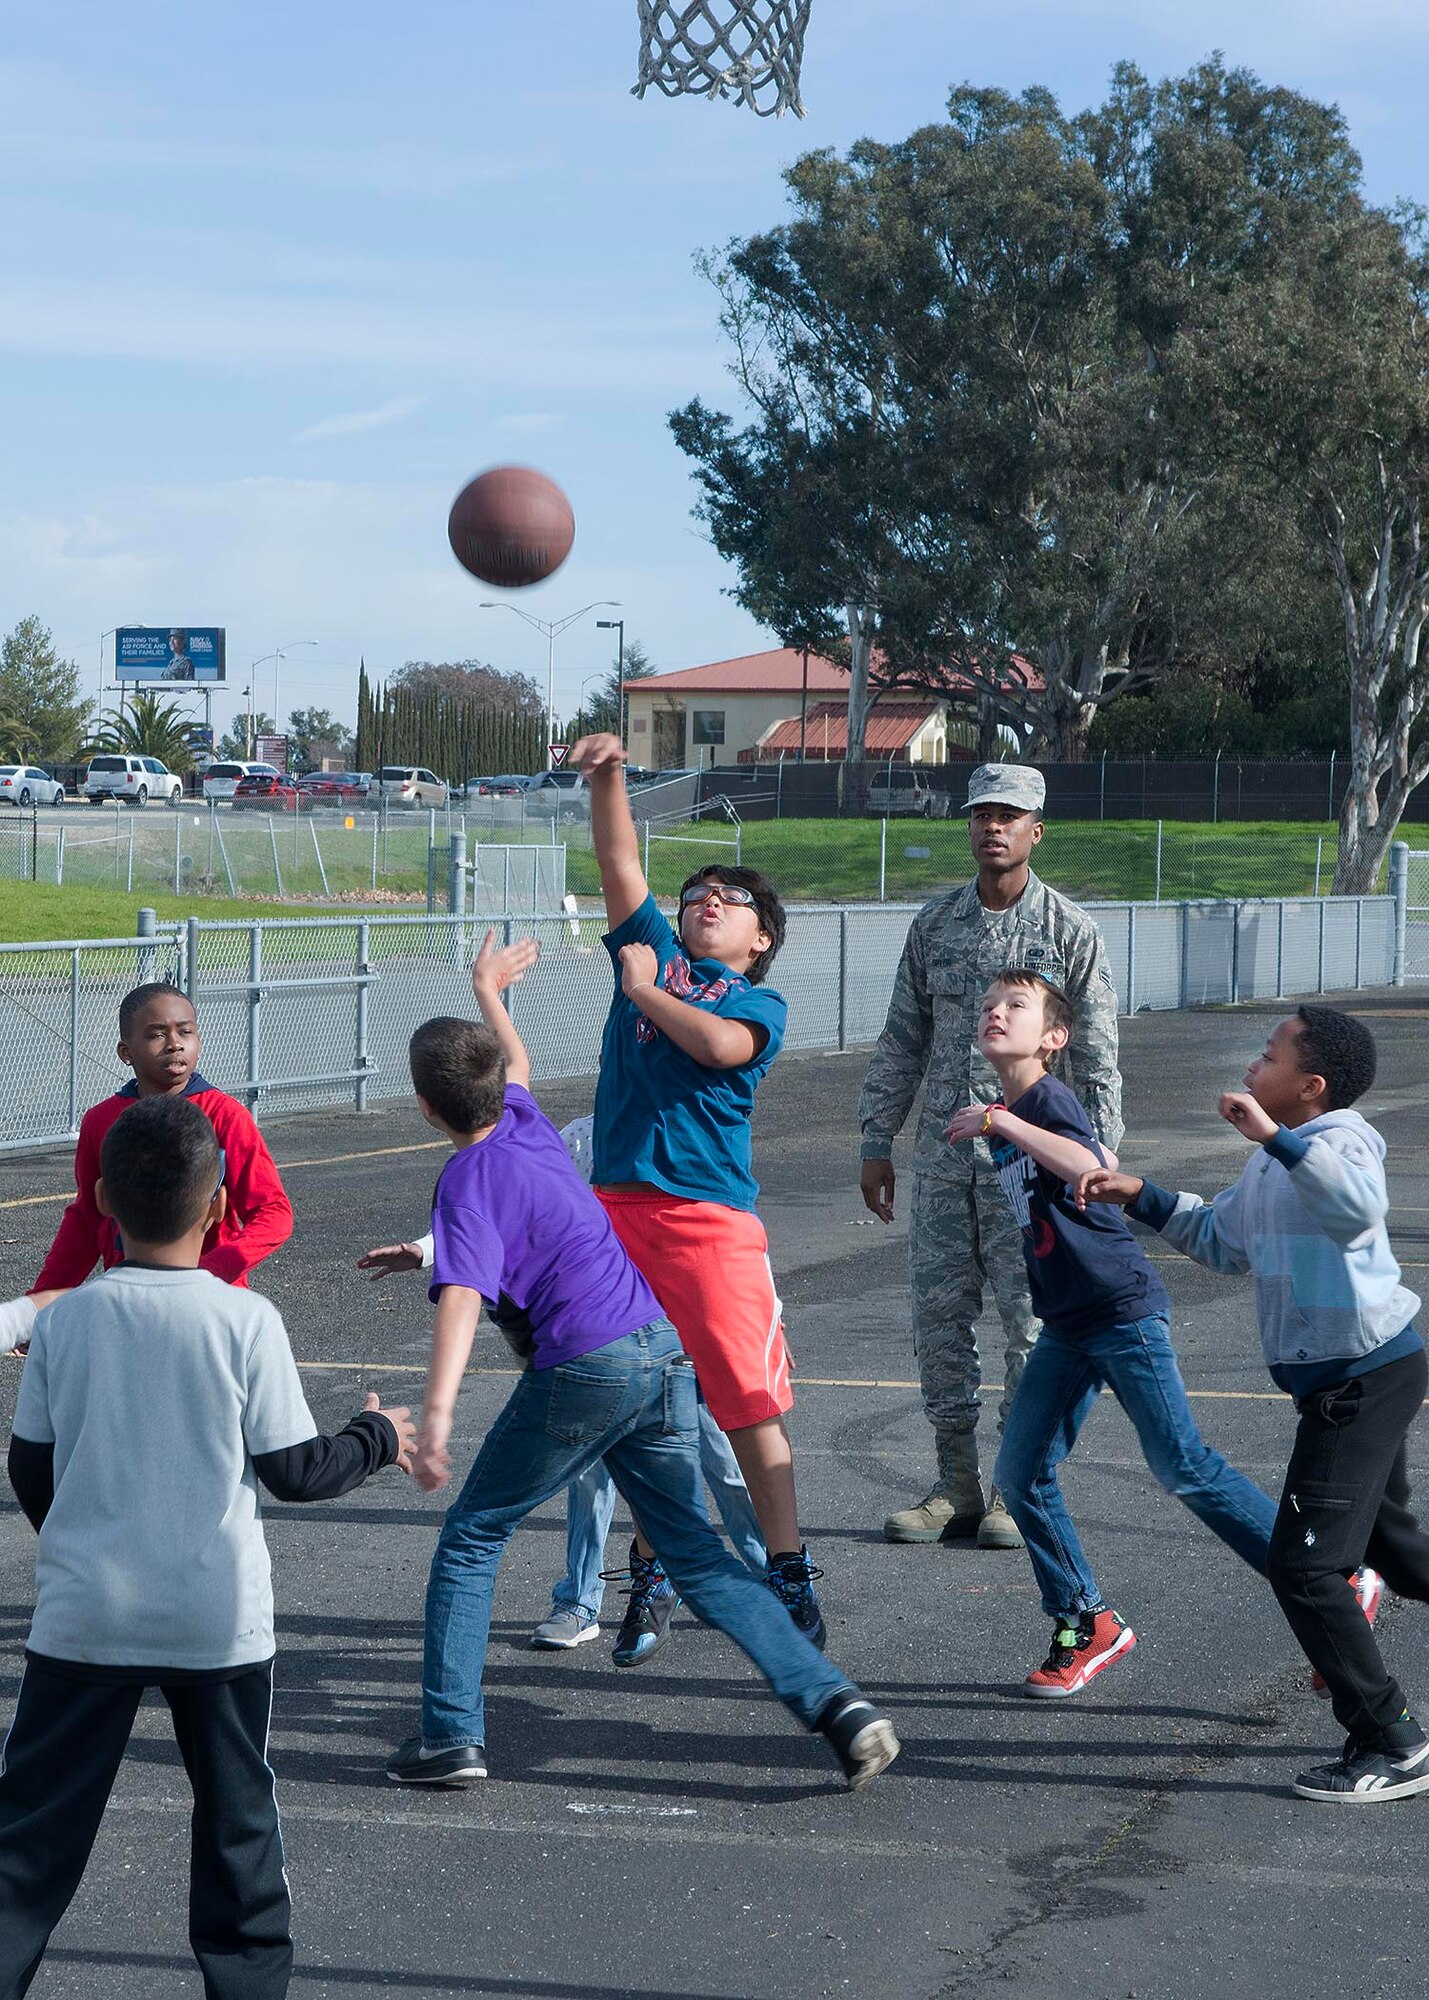 Airman 1st Class Adam Taylor, 60th Contracting Squadron, supervises children playing a basketball game at Travis Elementary School at Travis Air Force Base, Calif., Feb. 7, 2017. Taylor is a regular volunteer at the school as a yard monitor. (U.S. Air Force  photo/T.C. Perkins Jr.)